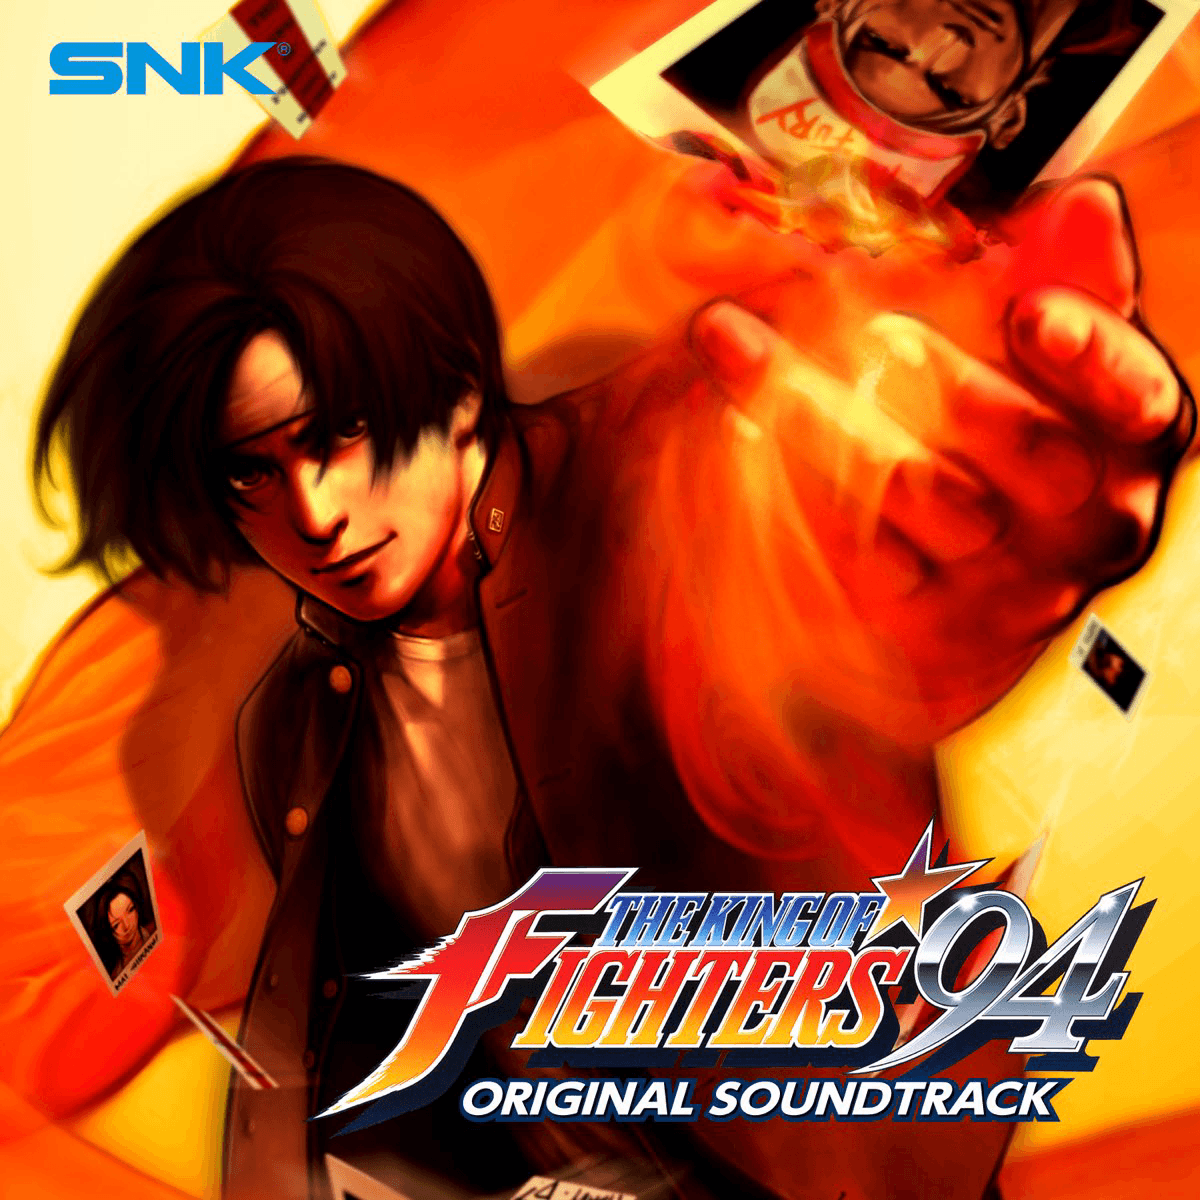 The King of Fighters ’94 Original Soundtrack